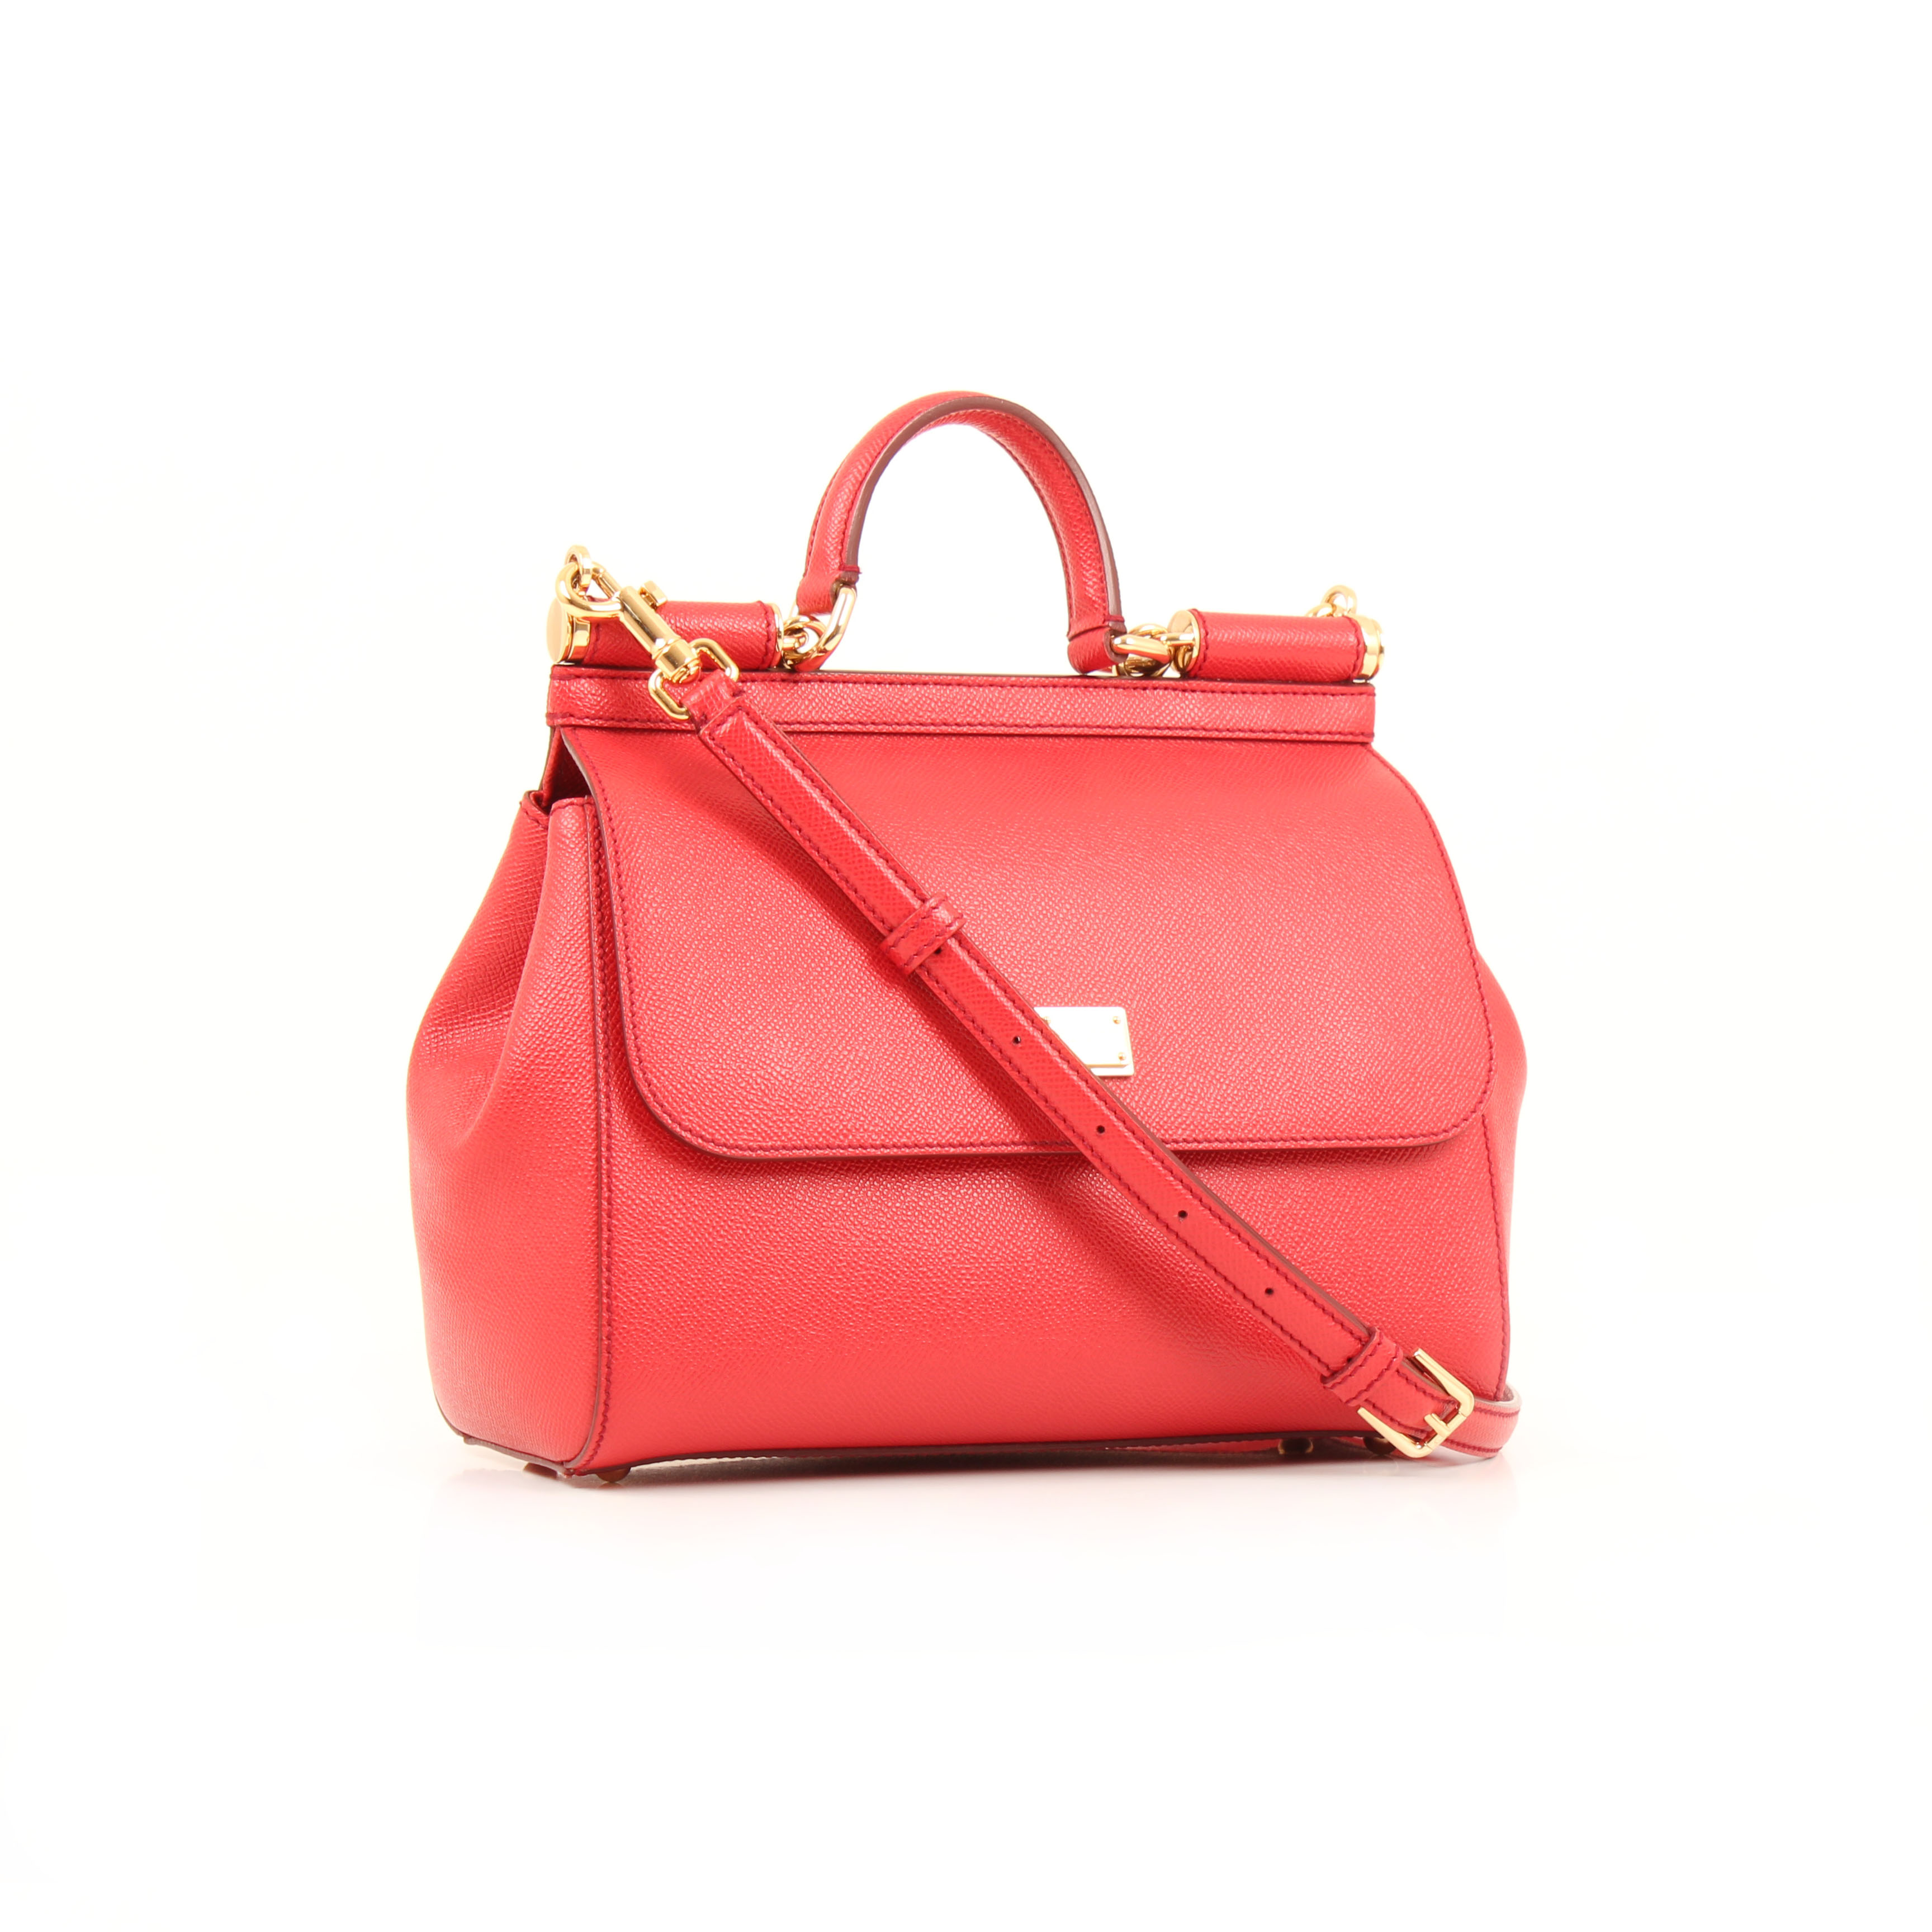 dolce gabbana sicily bag red grained leather general